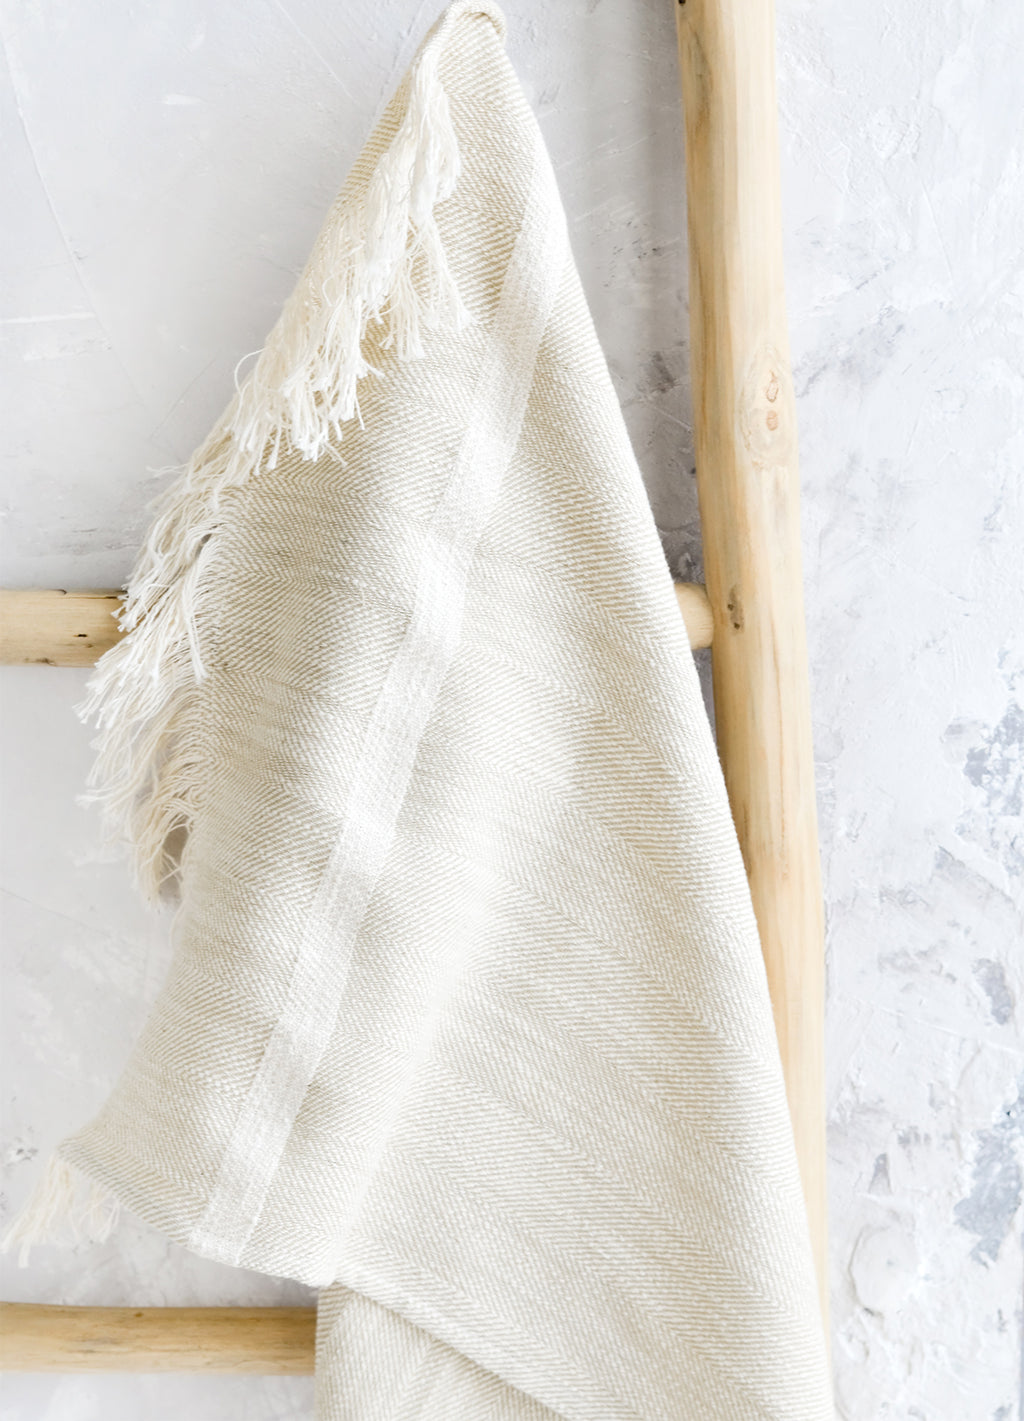 2: A woven kitchen towel in white hanging on a ladder.